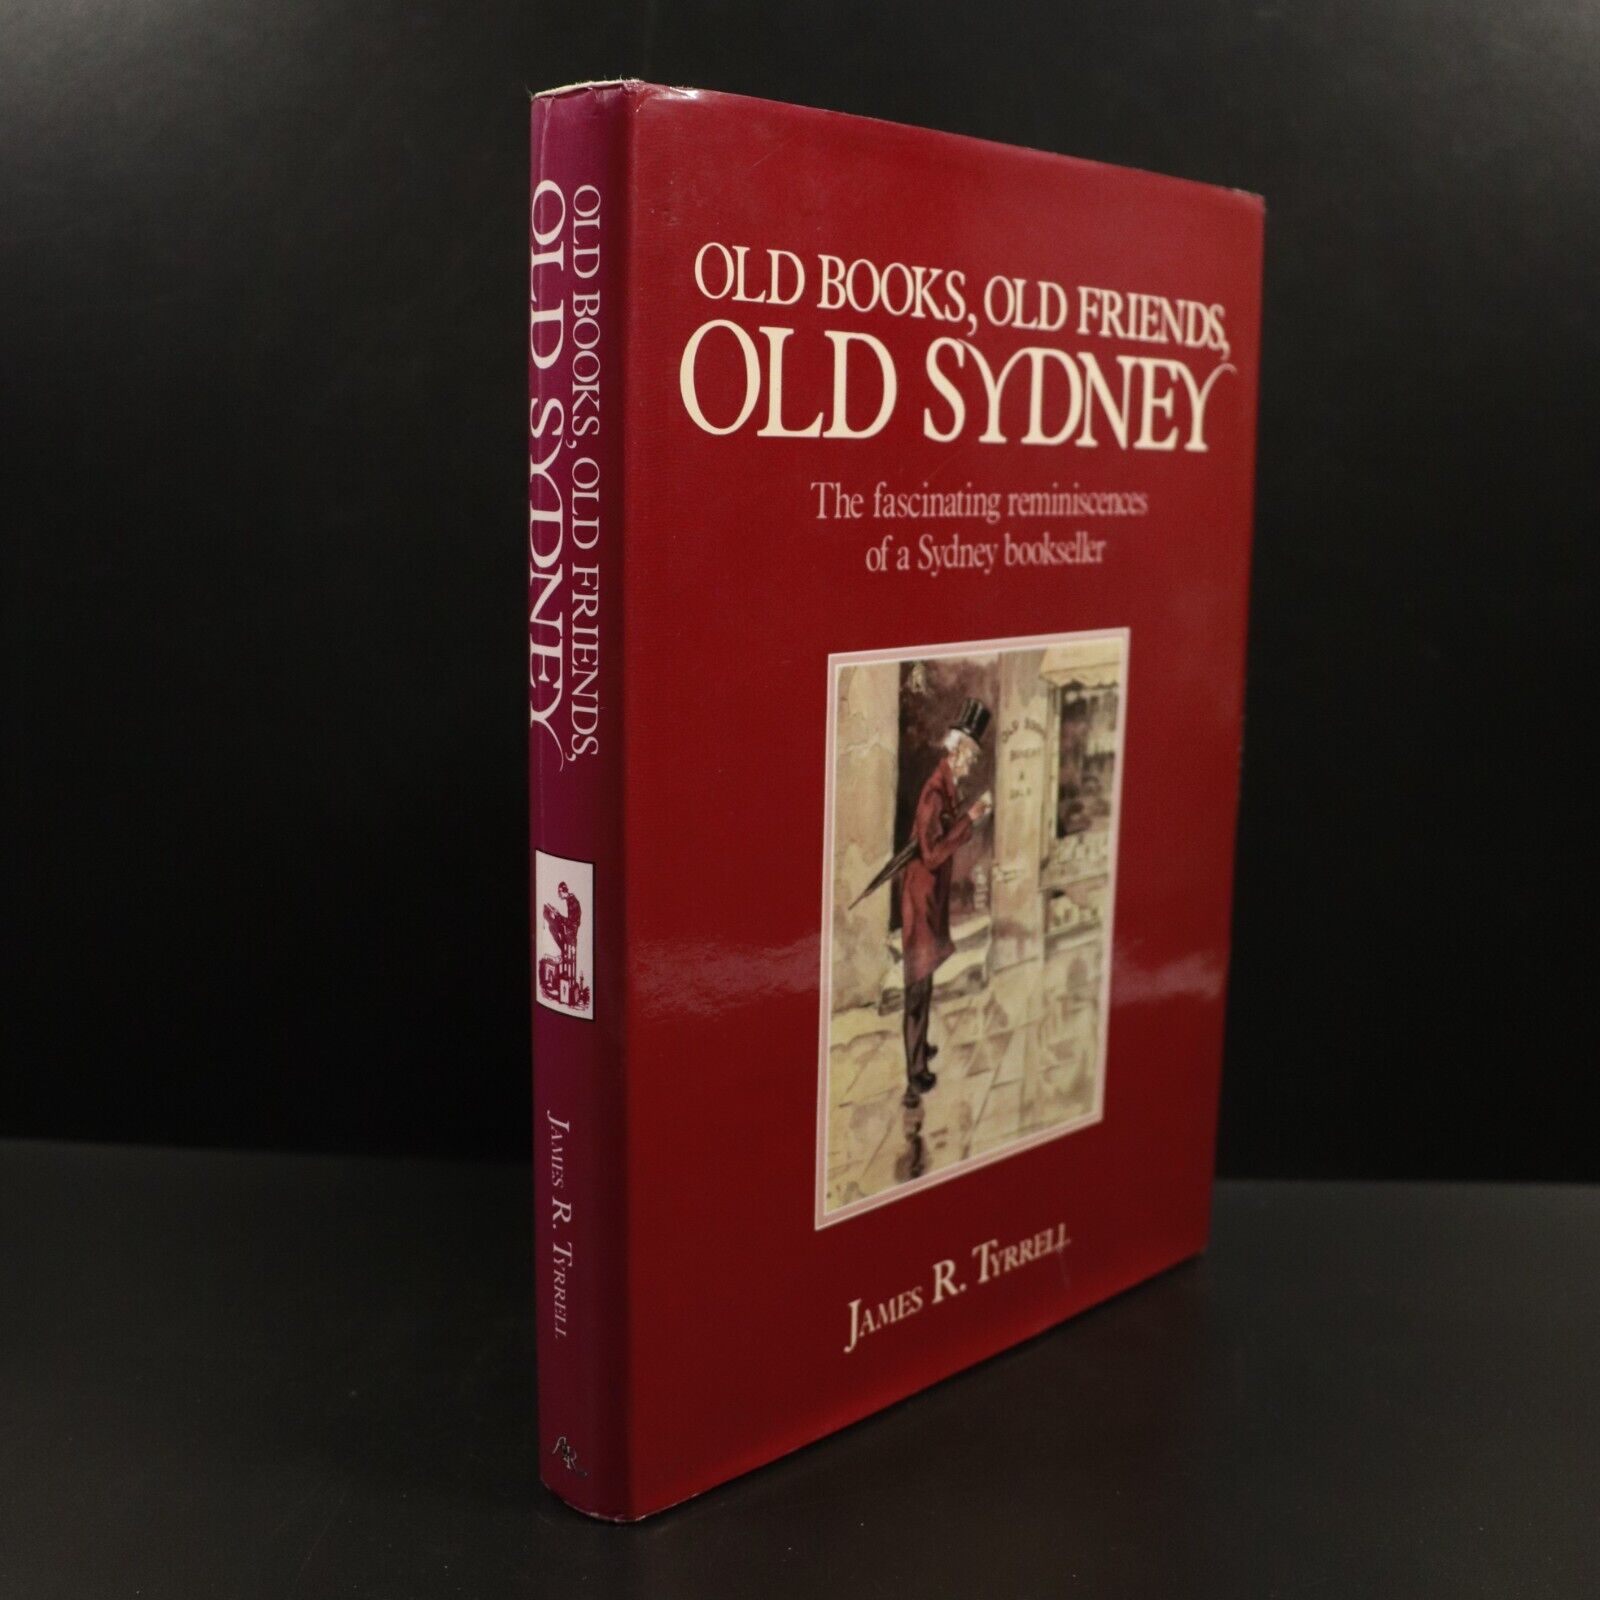 1987 Old Books, Old Friends, Old Sydney by JR Tyrrell Australian History Book